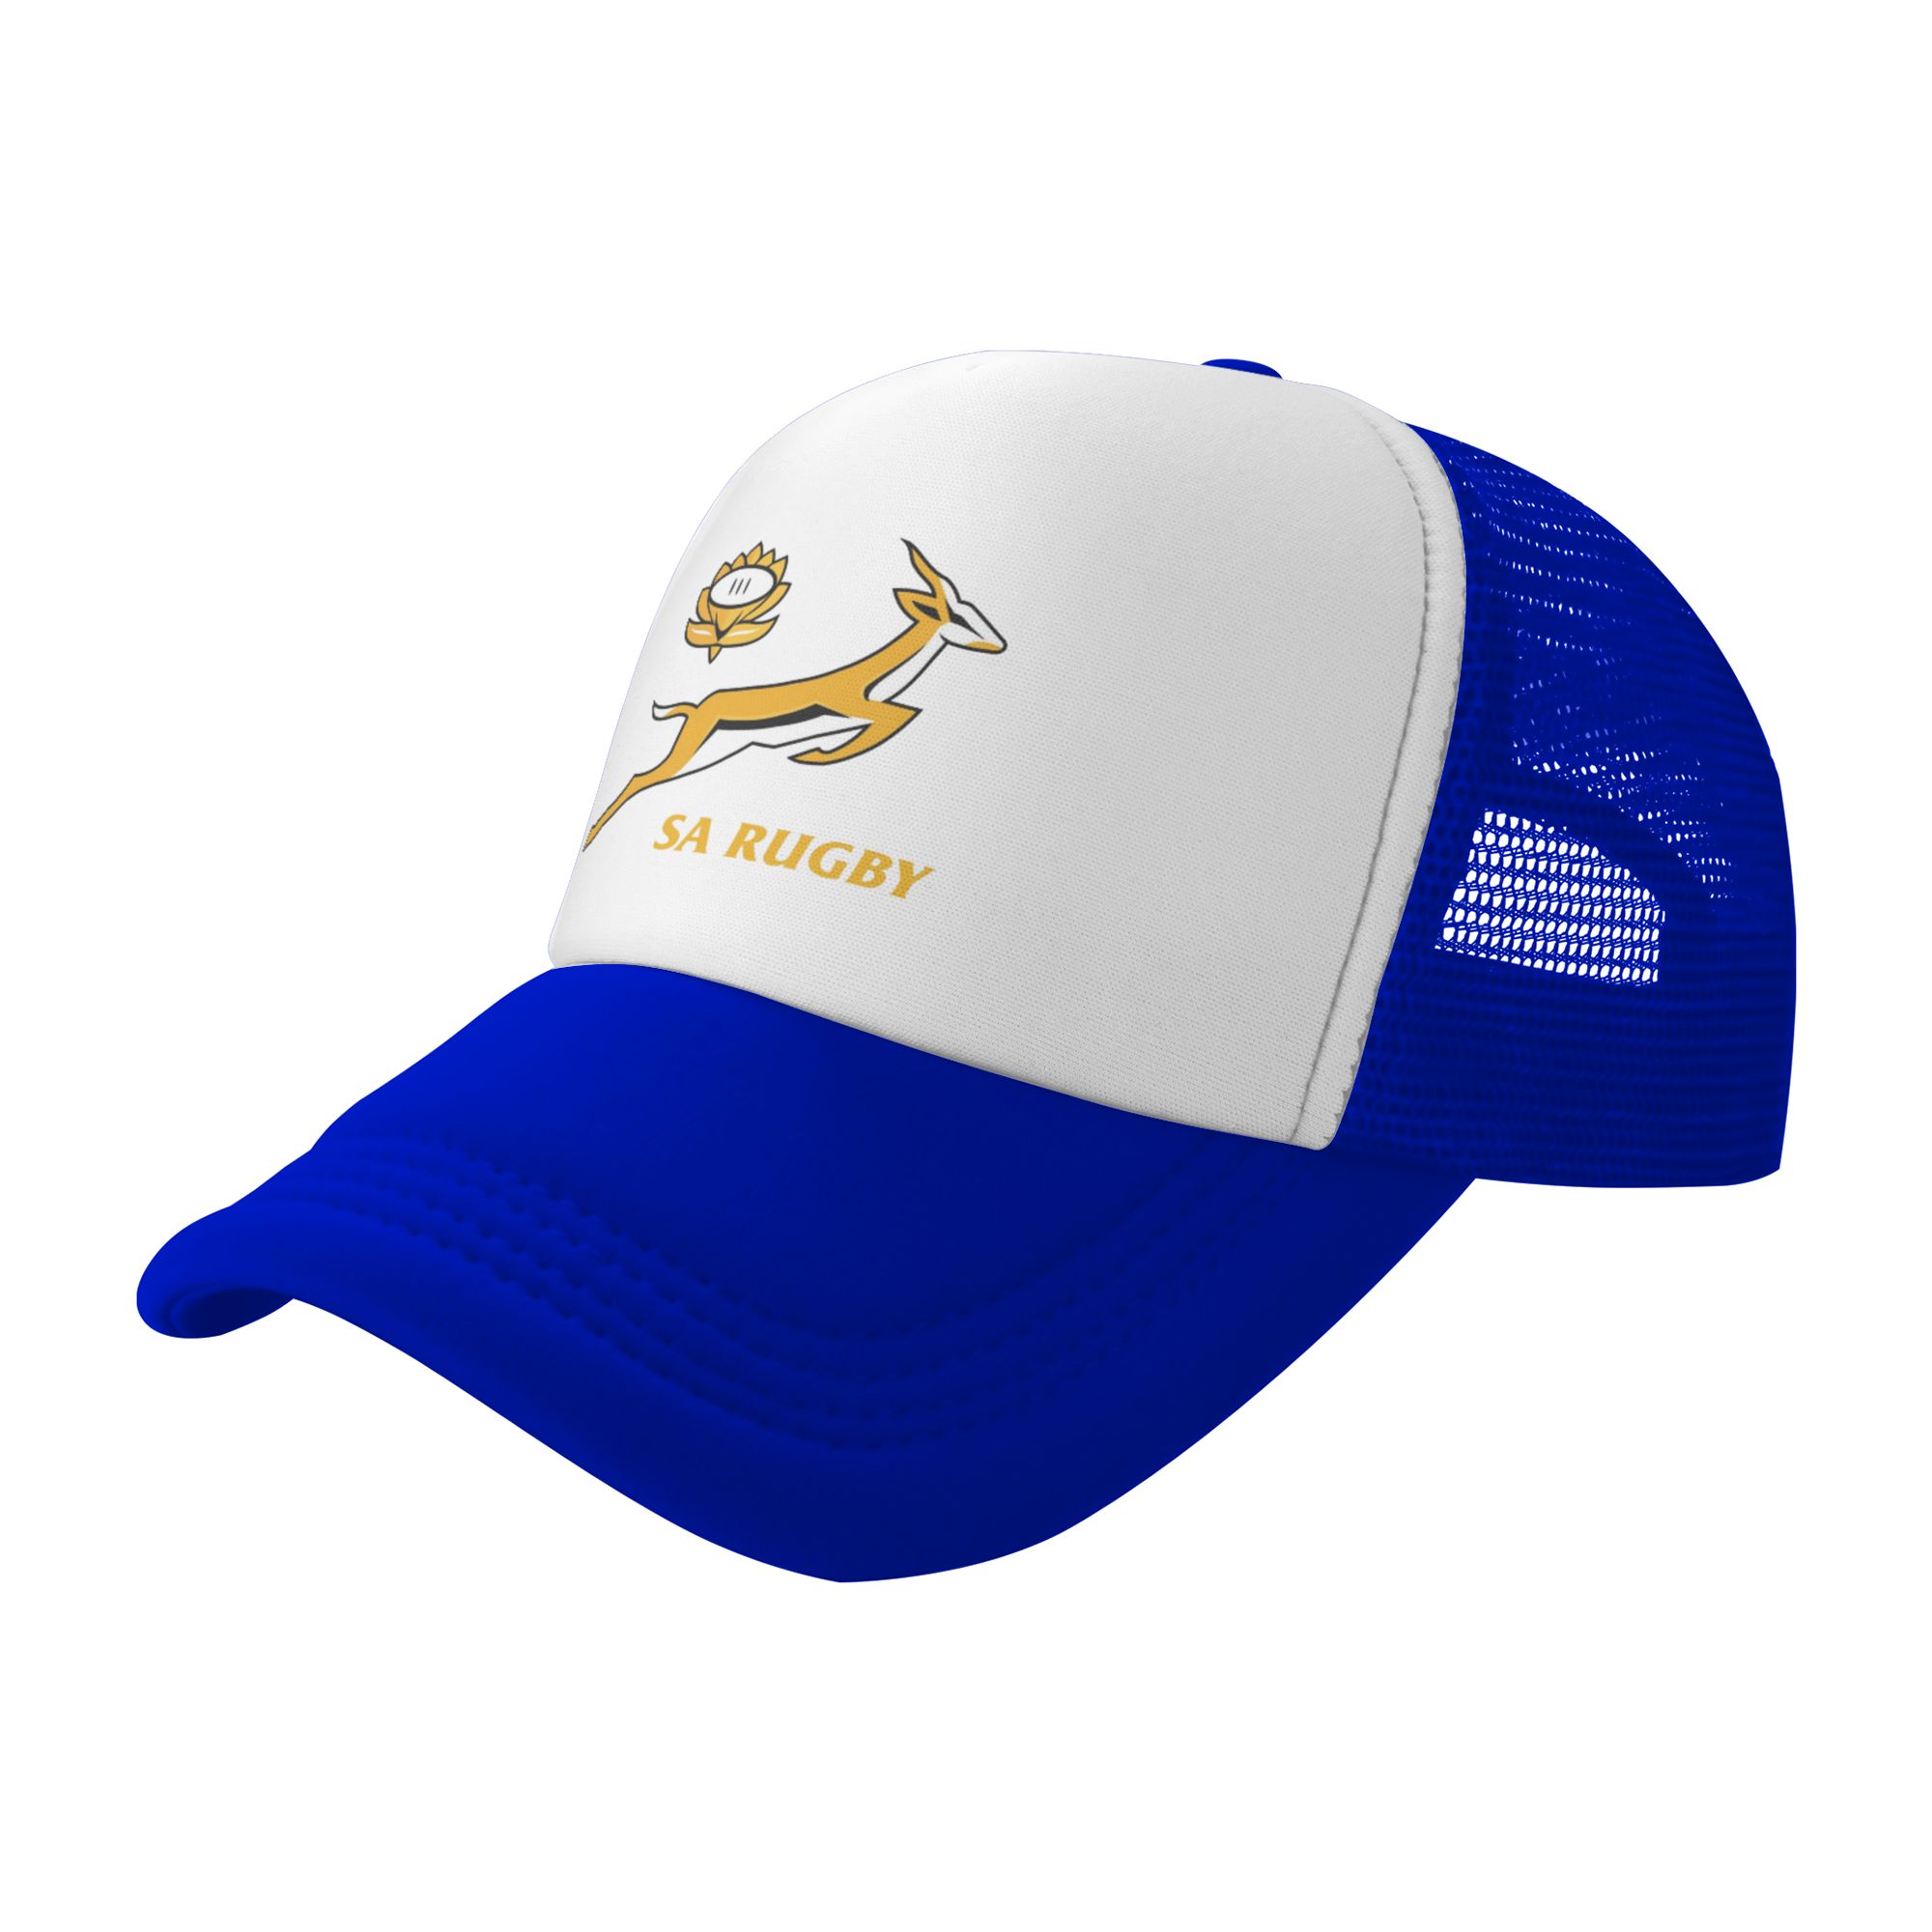 Springbok Rugby South Africa Trucker Hats Blue One Size Adjustable Snapback Hat